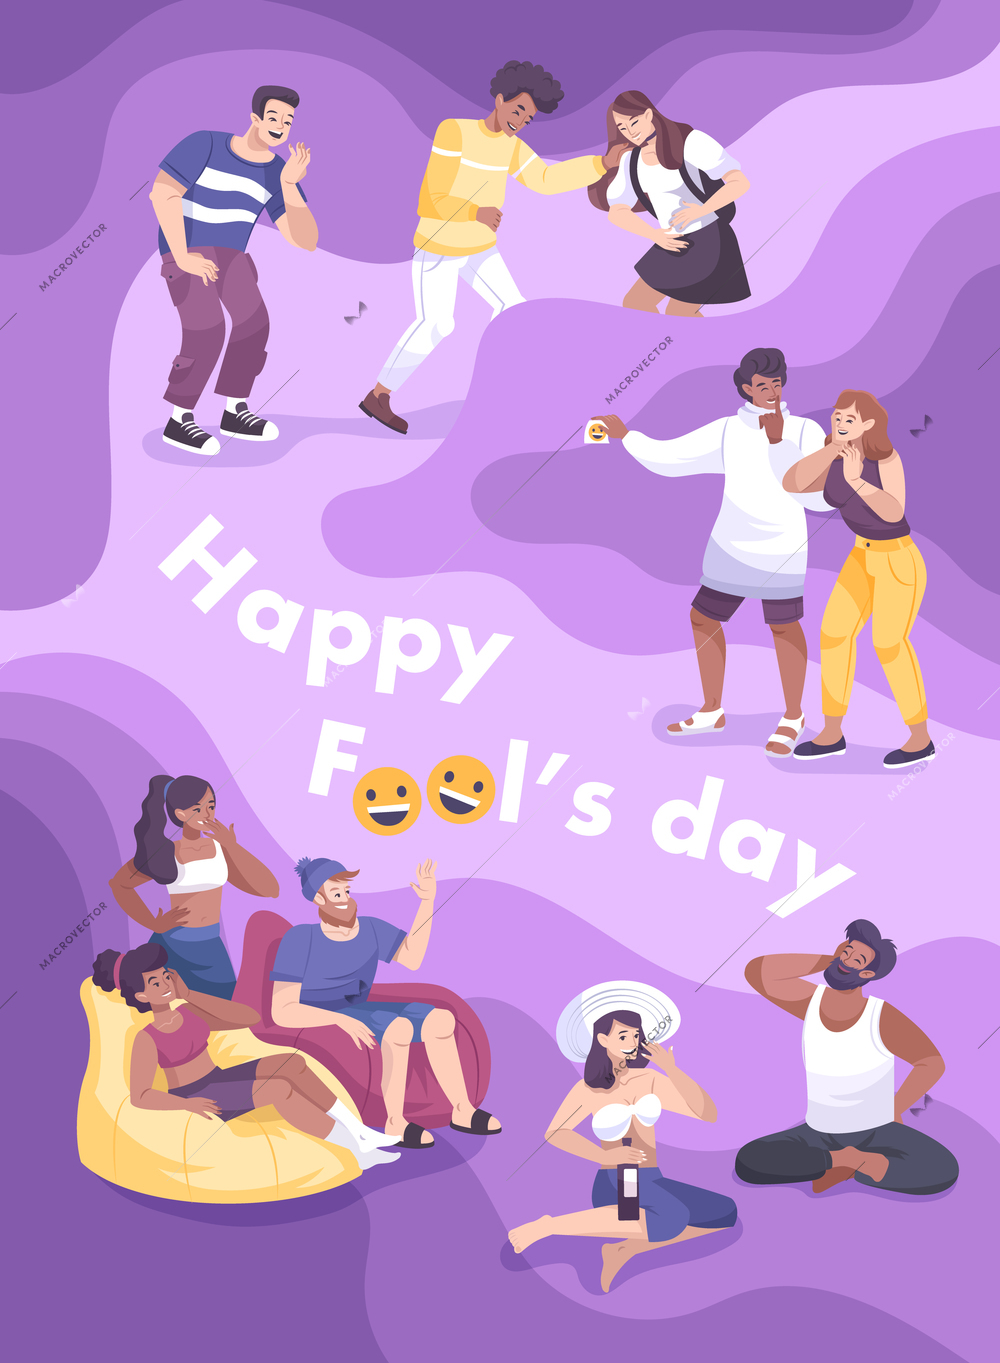 All fools day card flat composition with editable text surrounded by doodle characters of laughing people vector illustration